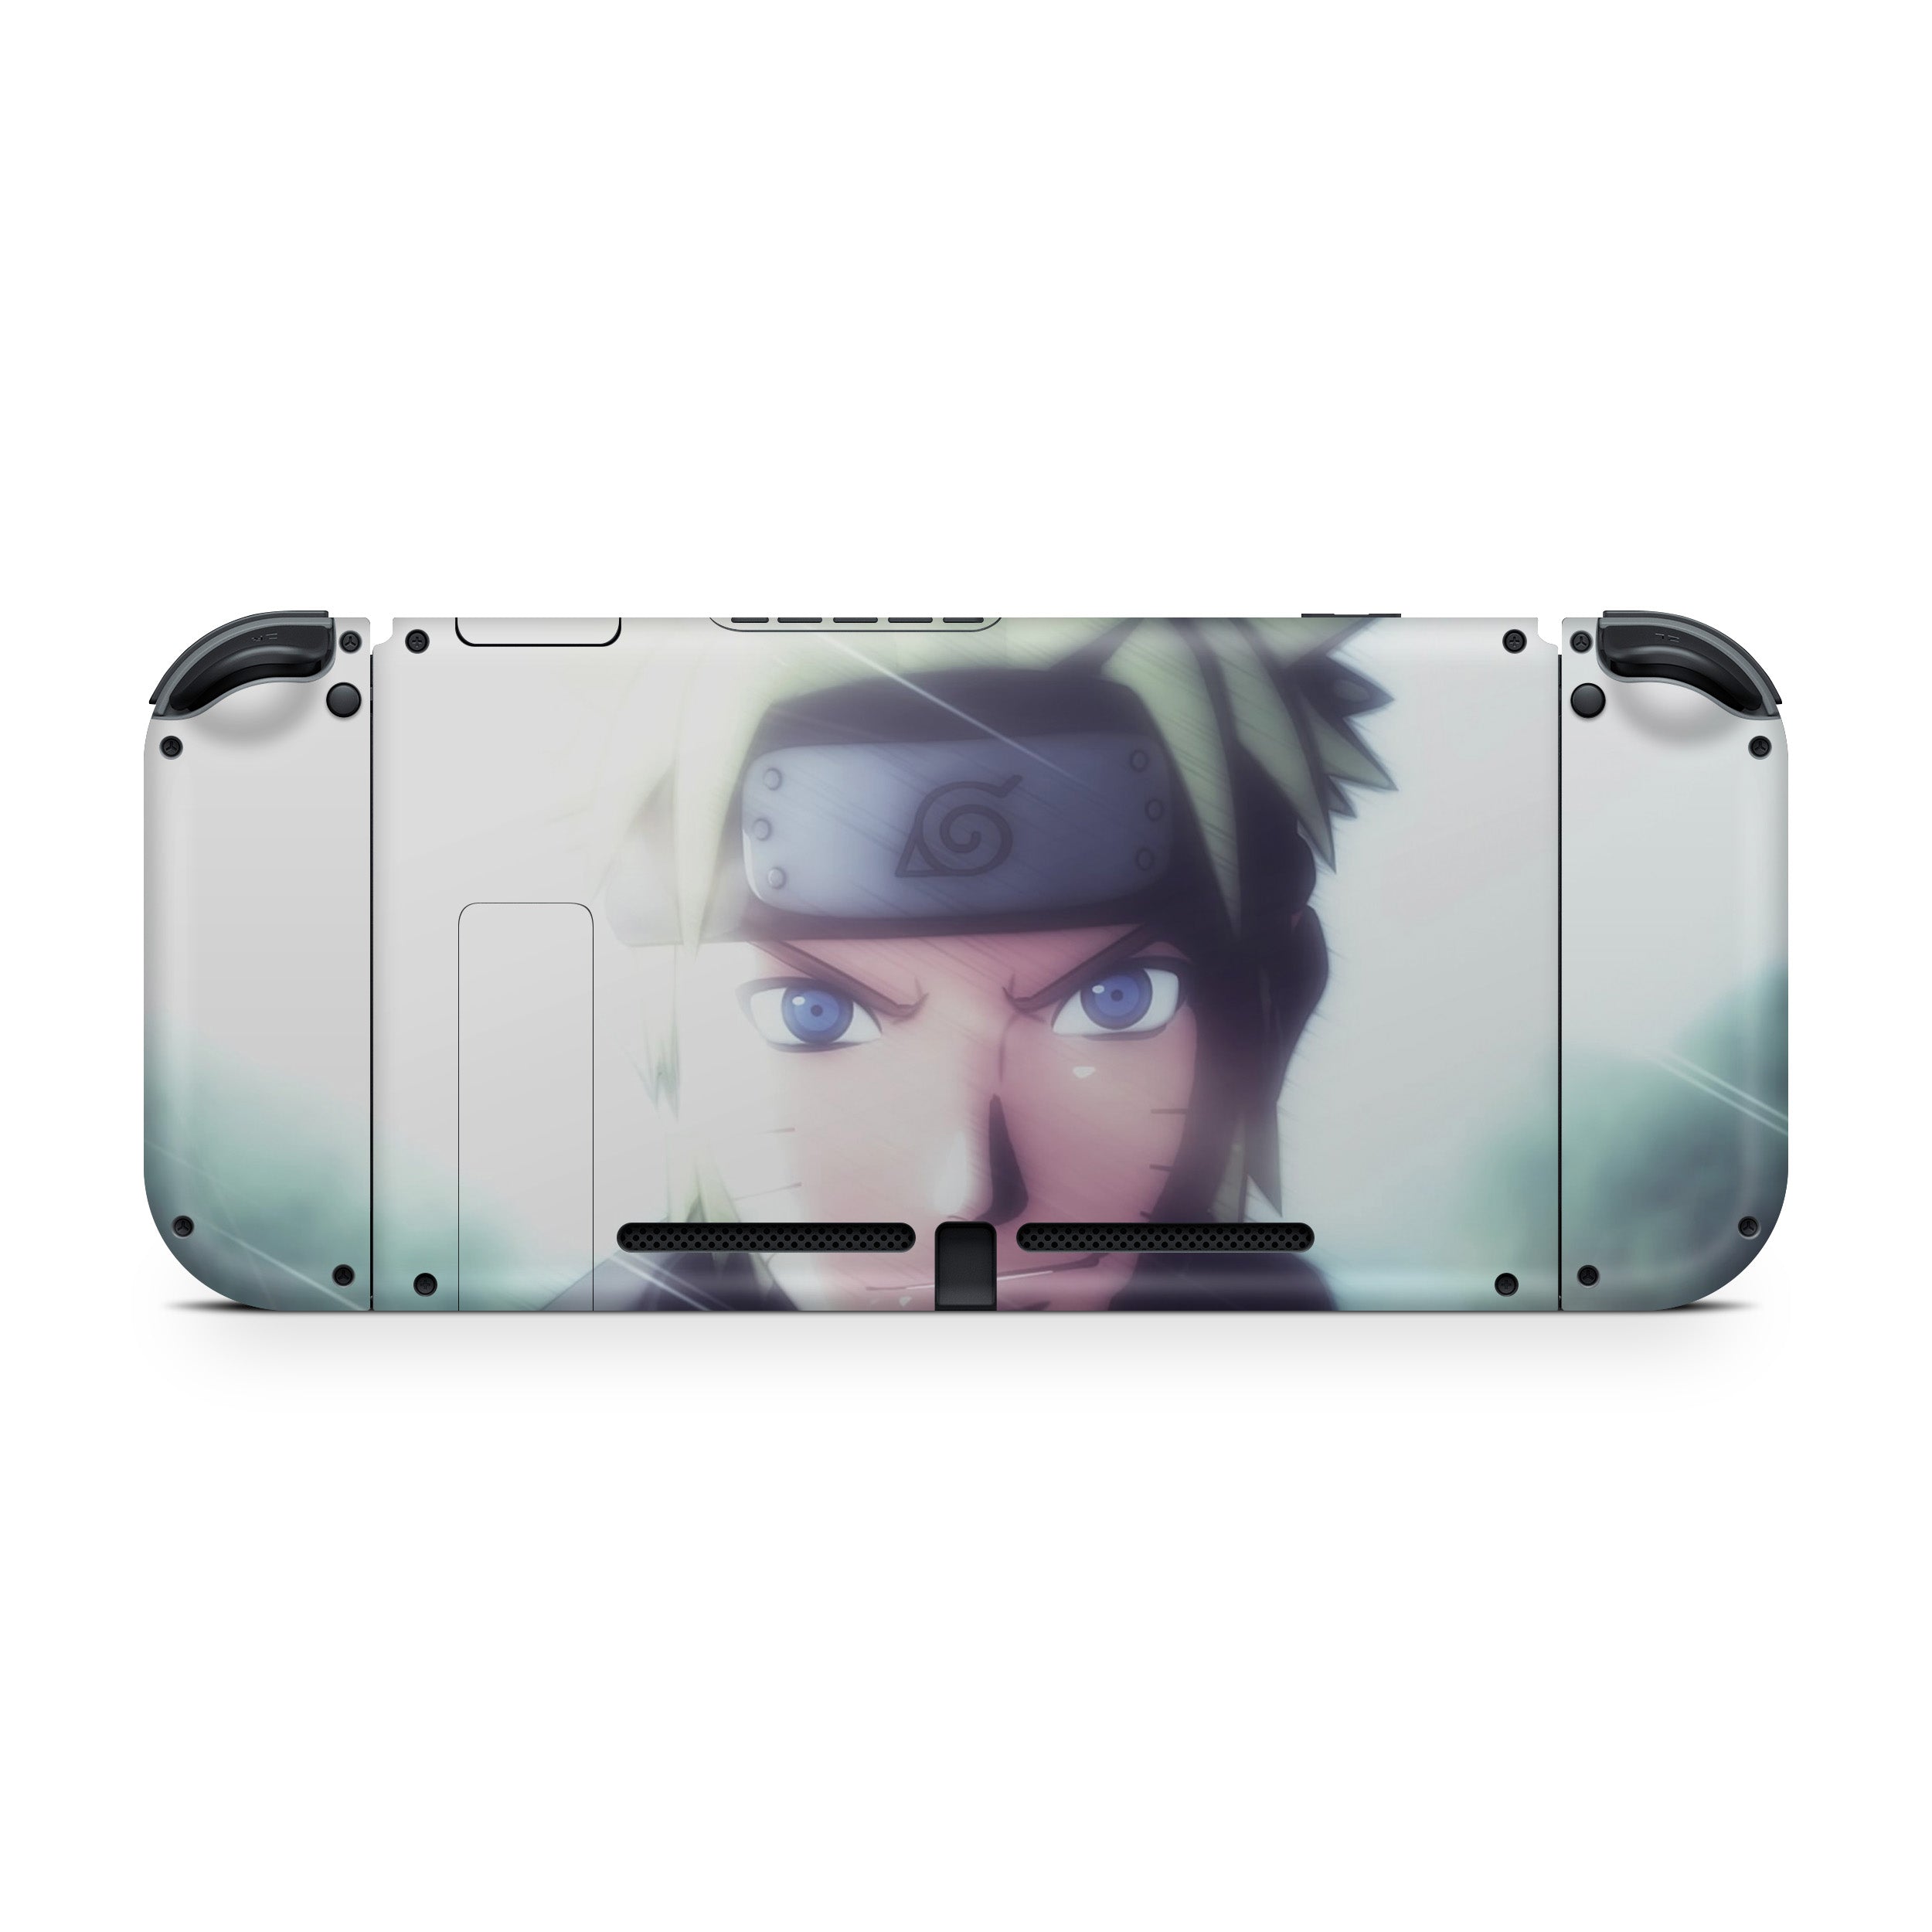 A video game skin featuring a Naruto design for the Nintendo Switch.